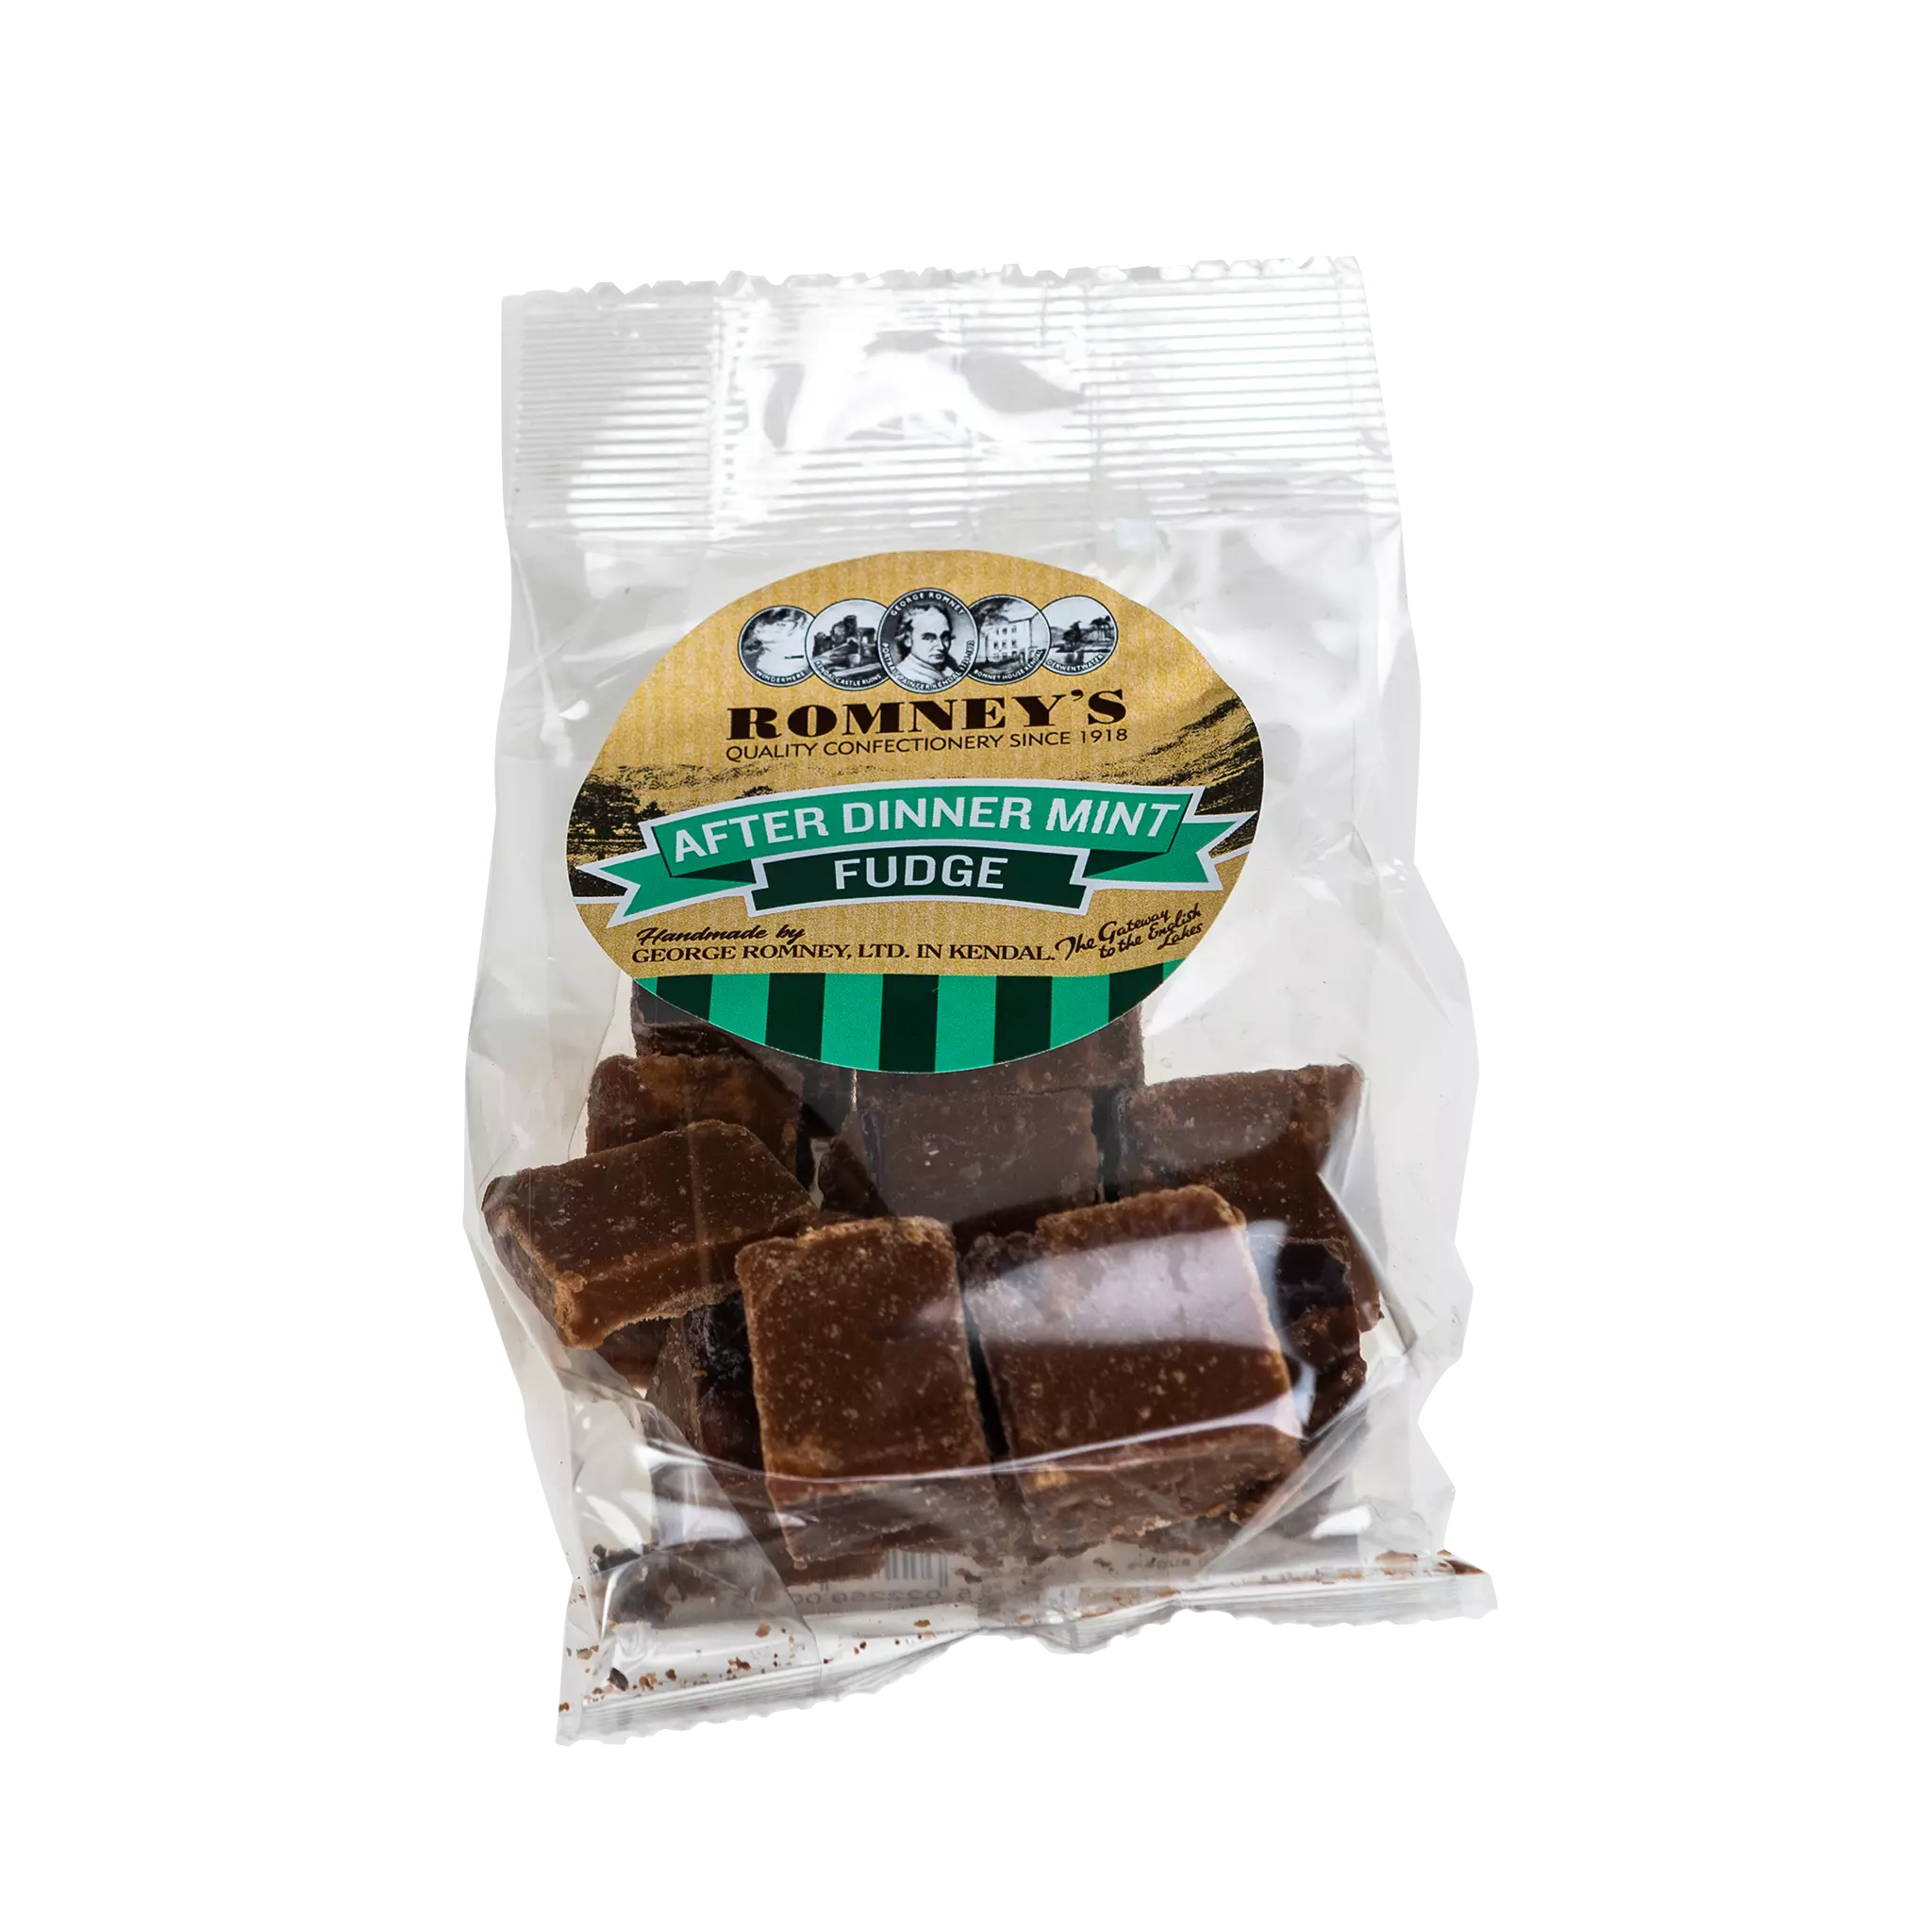 A transparent bag containing pieces of Fudge. The bag has a label on it that shows Romney's logo and says 'After Dinner Mint Fudge'.